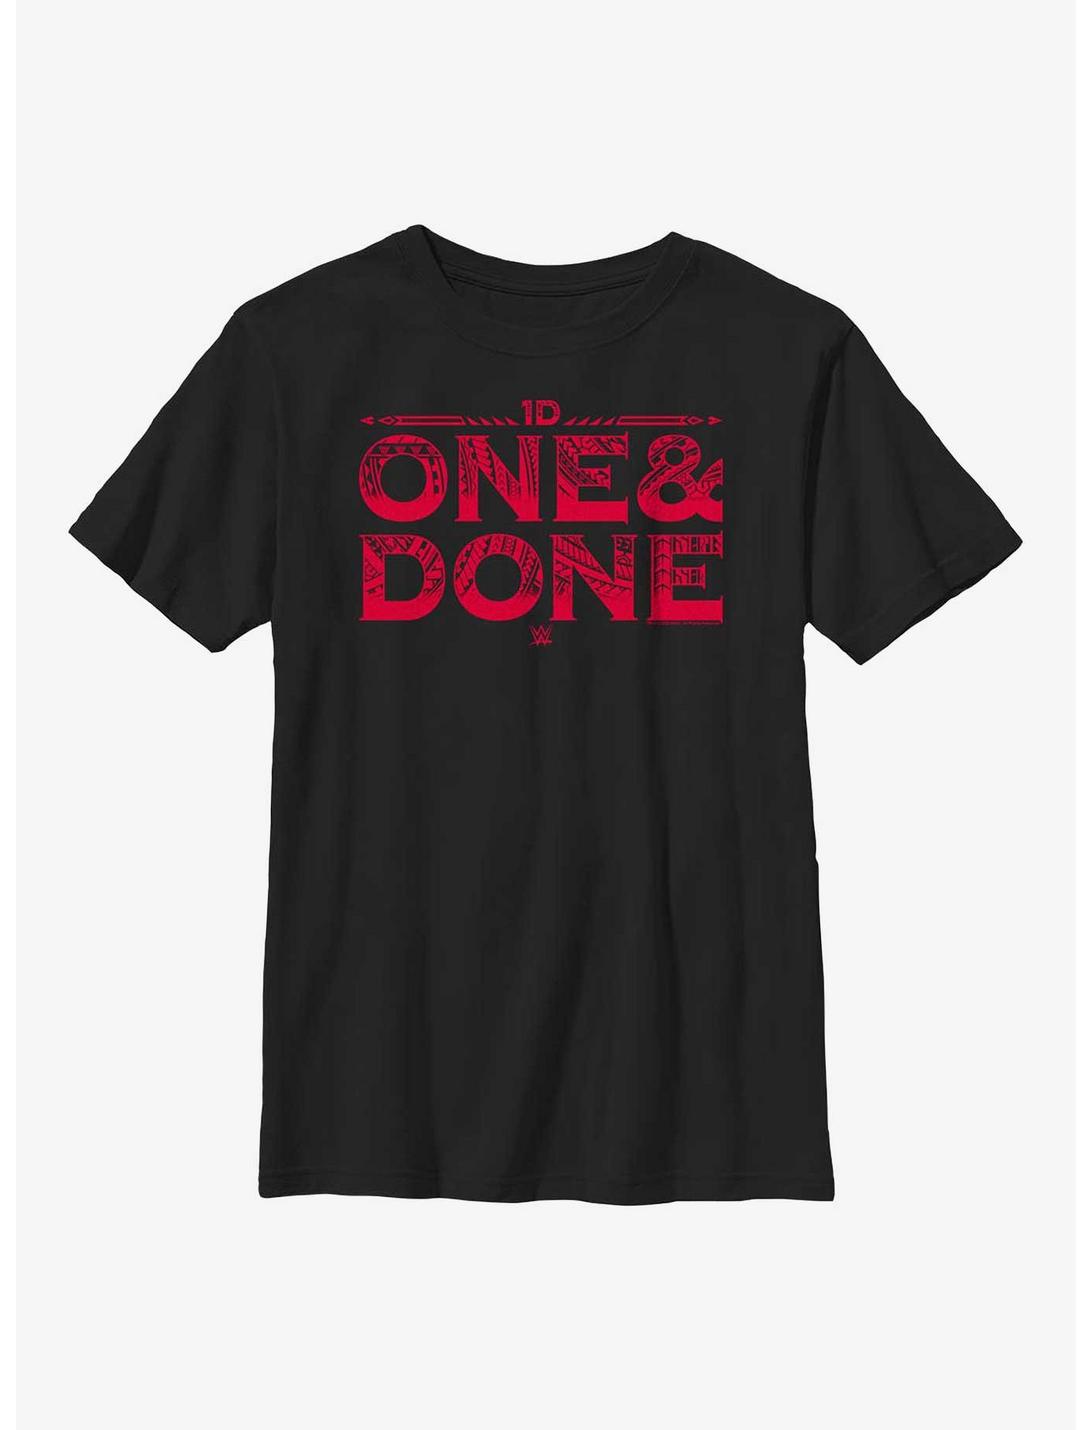 WWE The Usos One & Done Youth T-Shirt, BLACK, hi-res